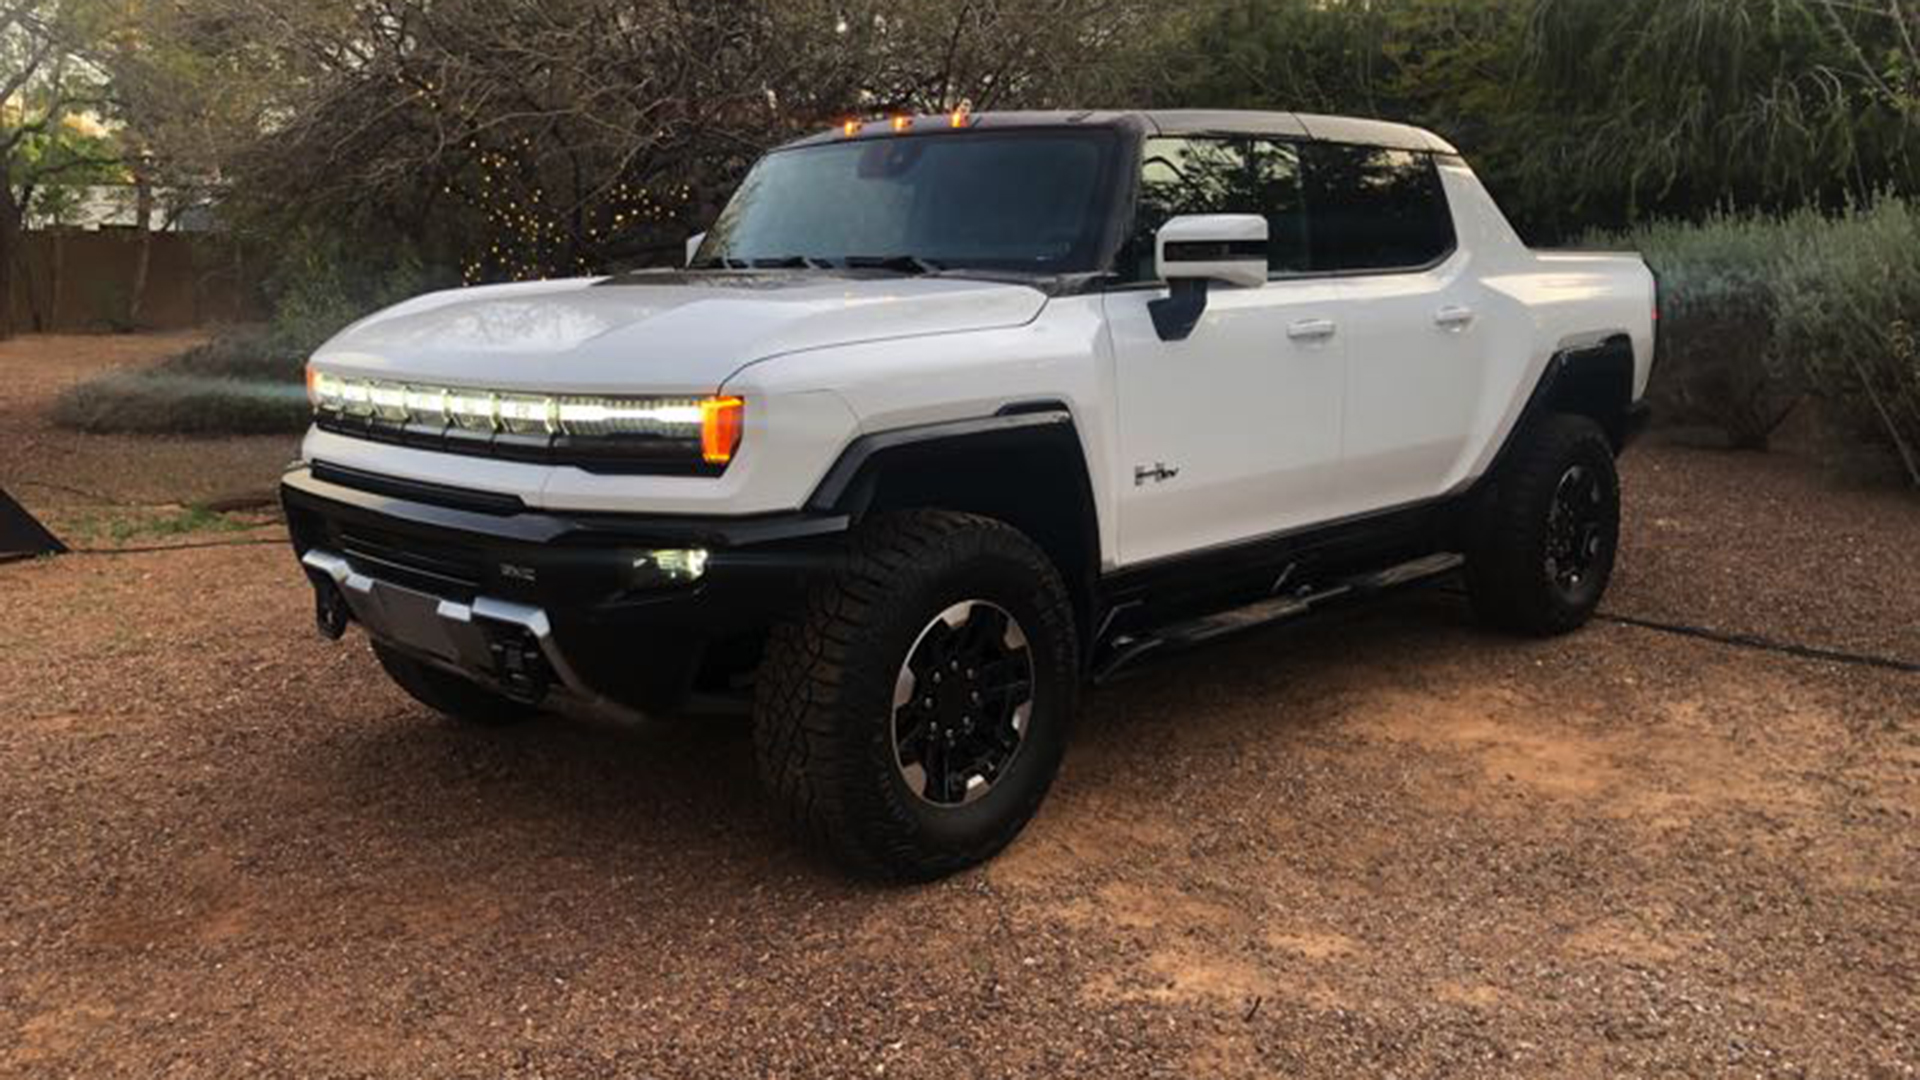 GMC goes over the top with all-new 2022 Hummer EV